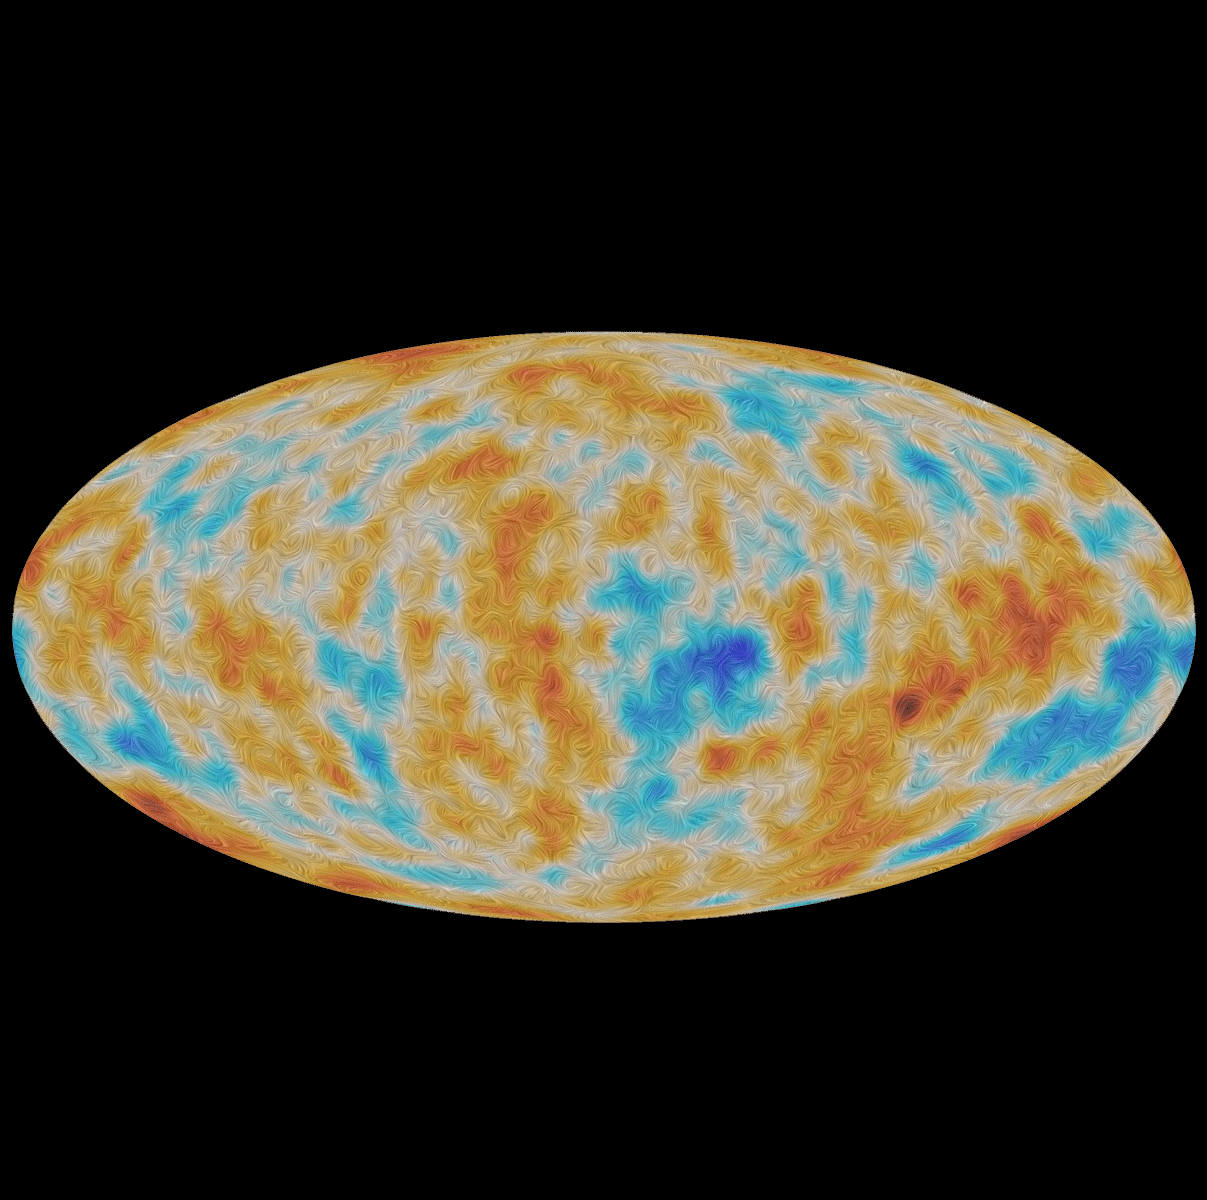 CMB polarisation: full sky and details 